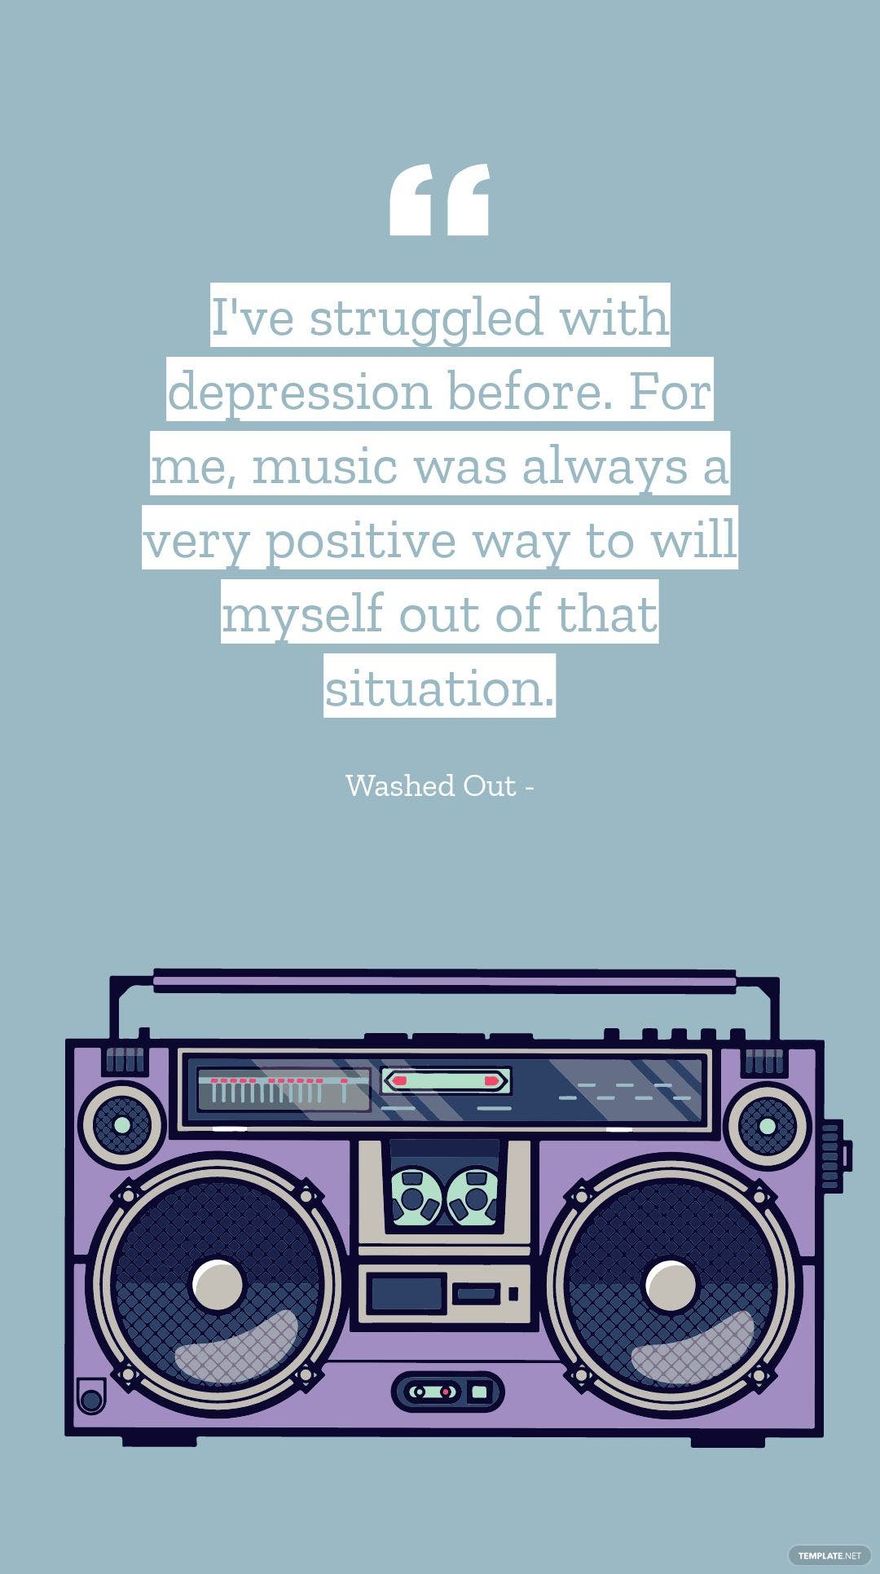 Washed Out - I've struggled with depression before. For me, music was always a very positive way to will myself out of that situation.